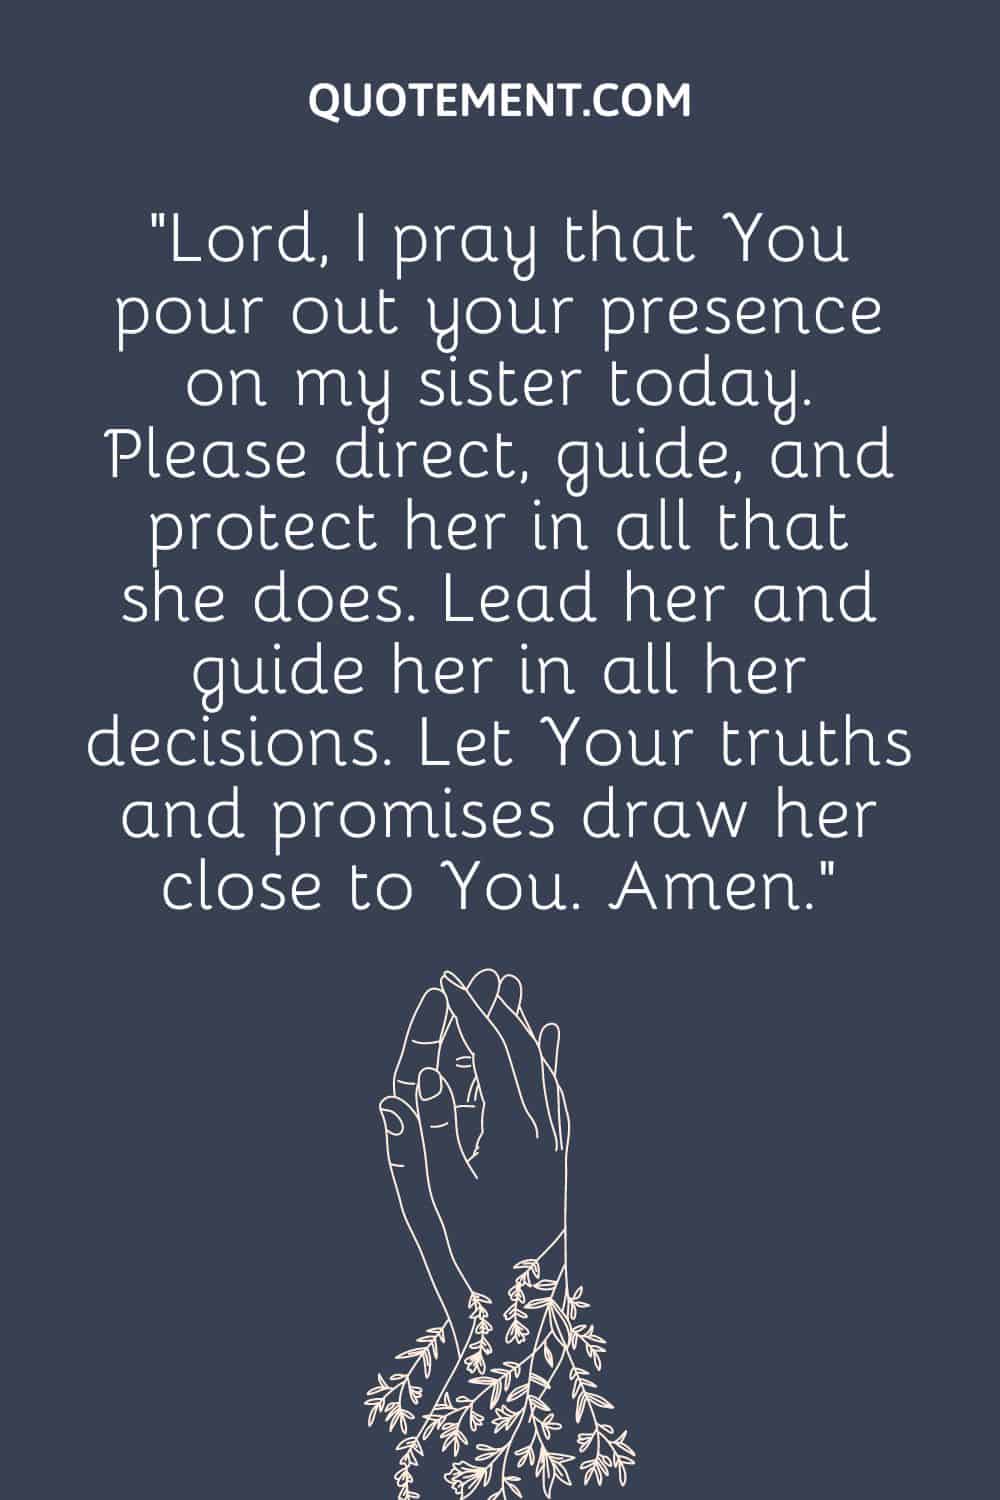 “Lord, I pray that You pour out your presence on my sister today.